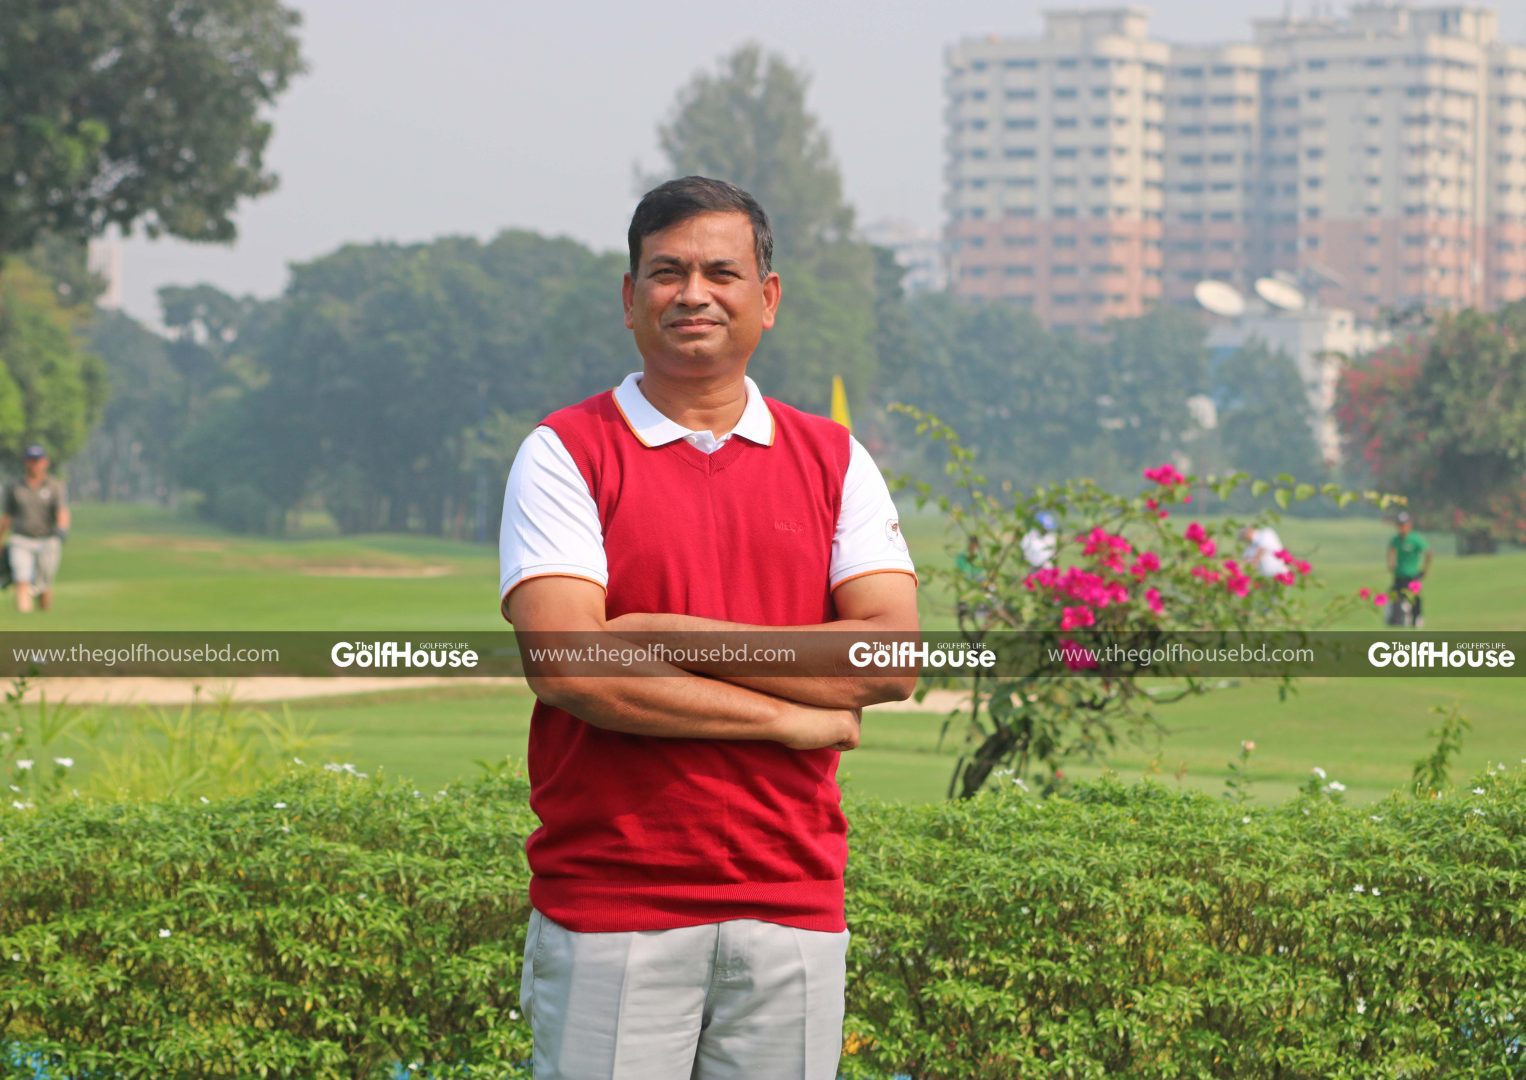 Brigadier General Sayed Siddique has been rewarded for his good work in Bangladesh golf with another term as the secretary general of Bangladesh Golf Federation.